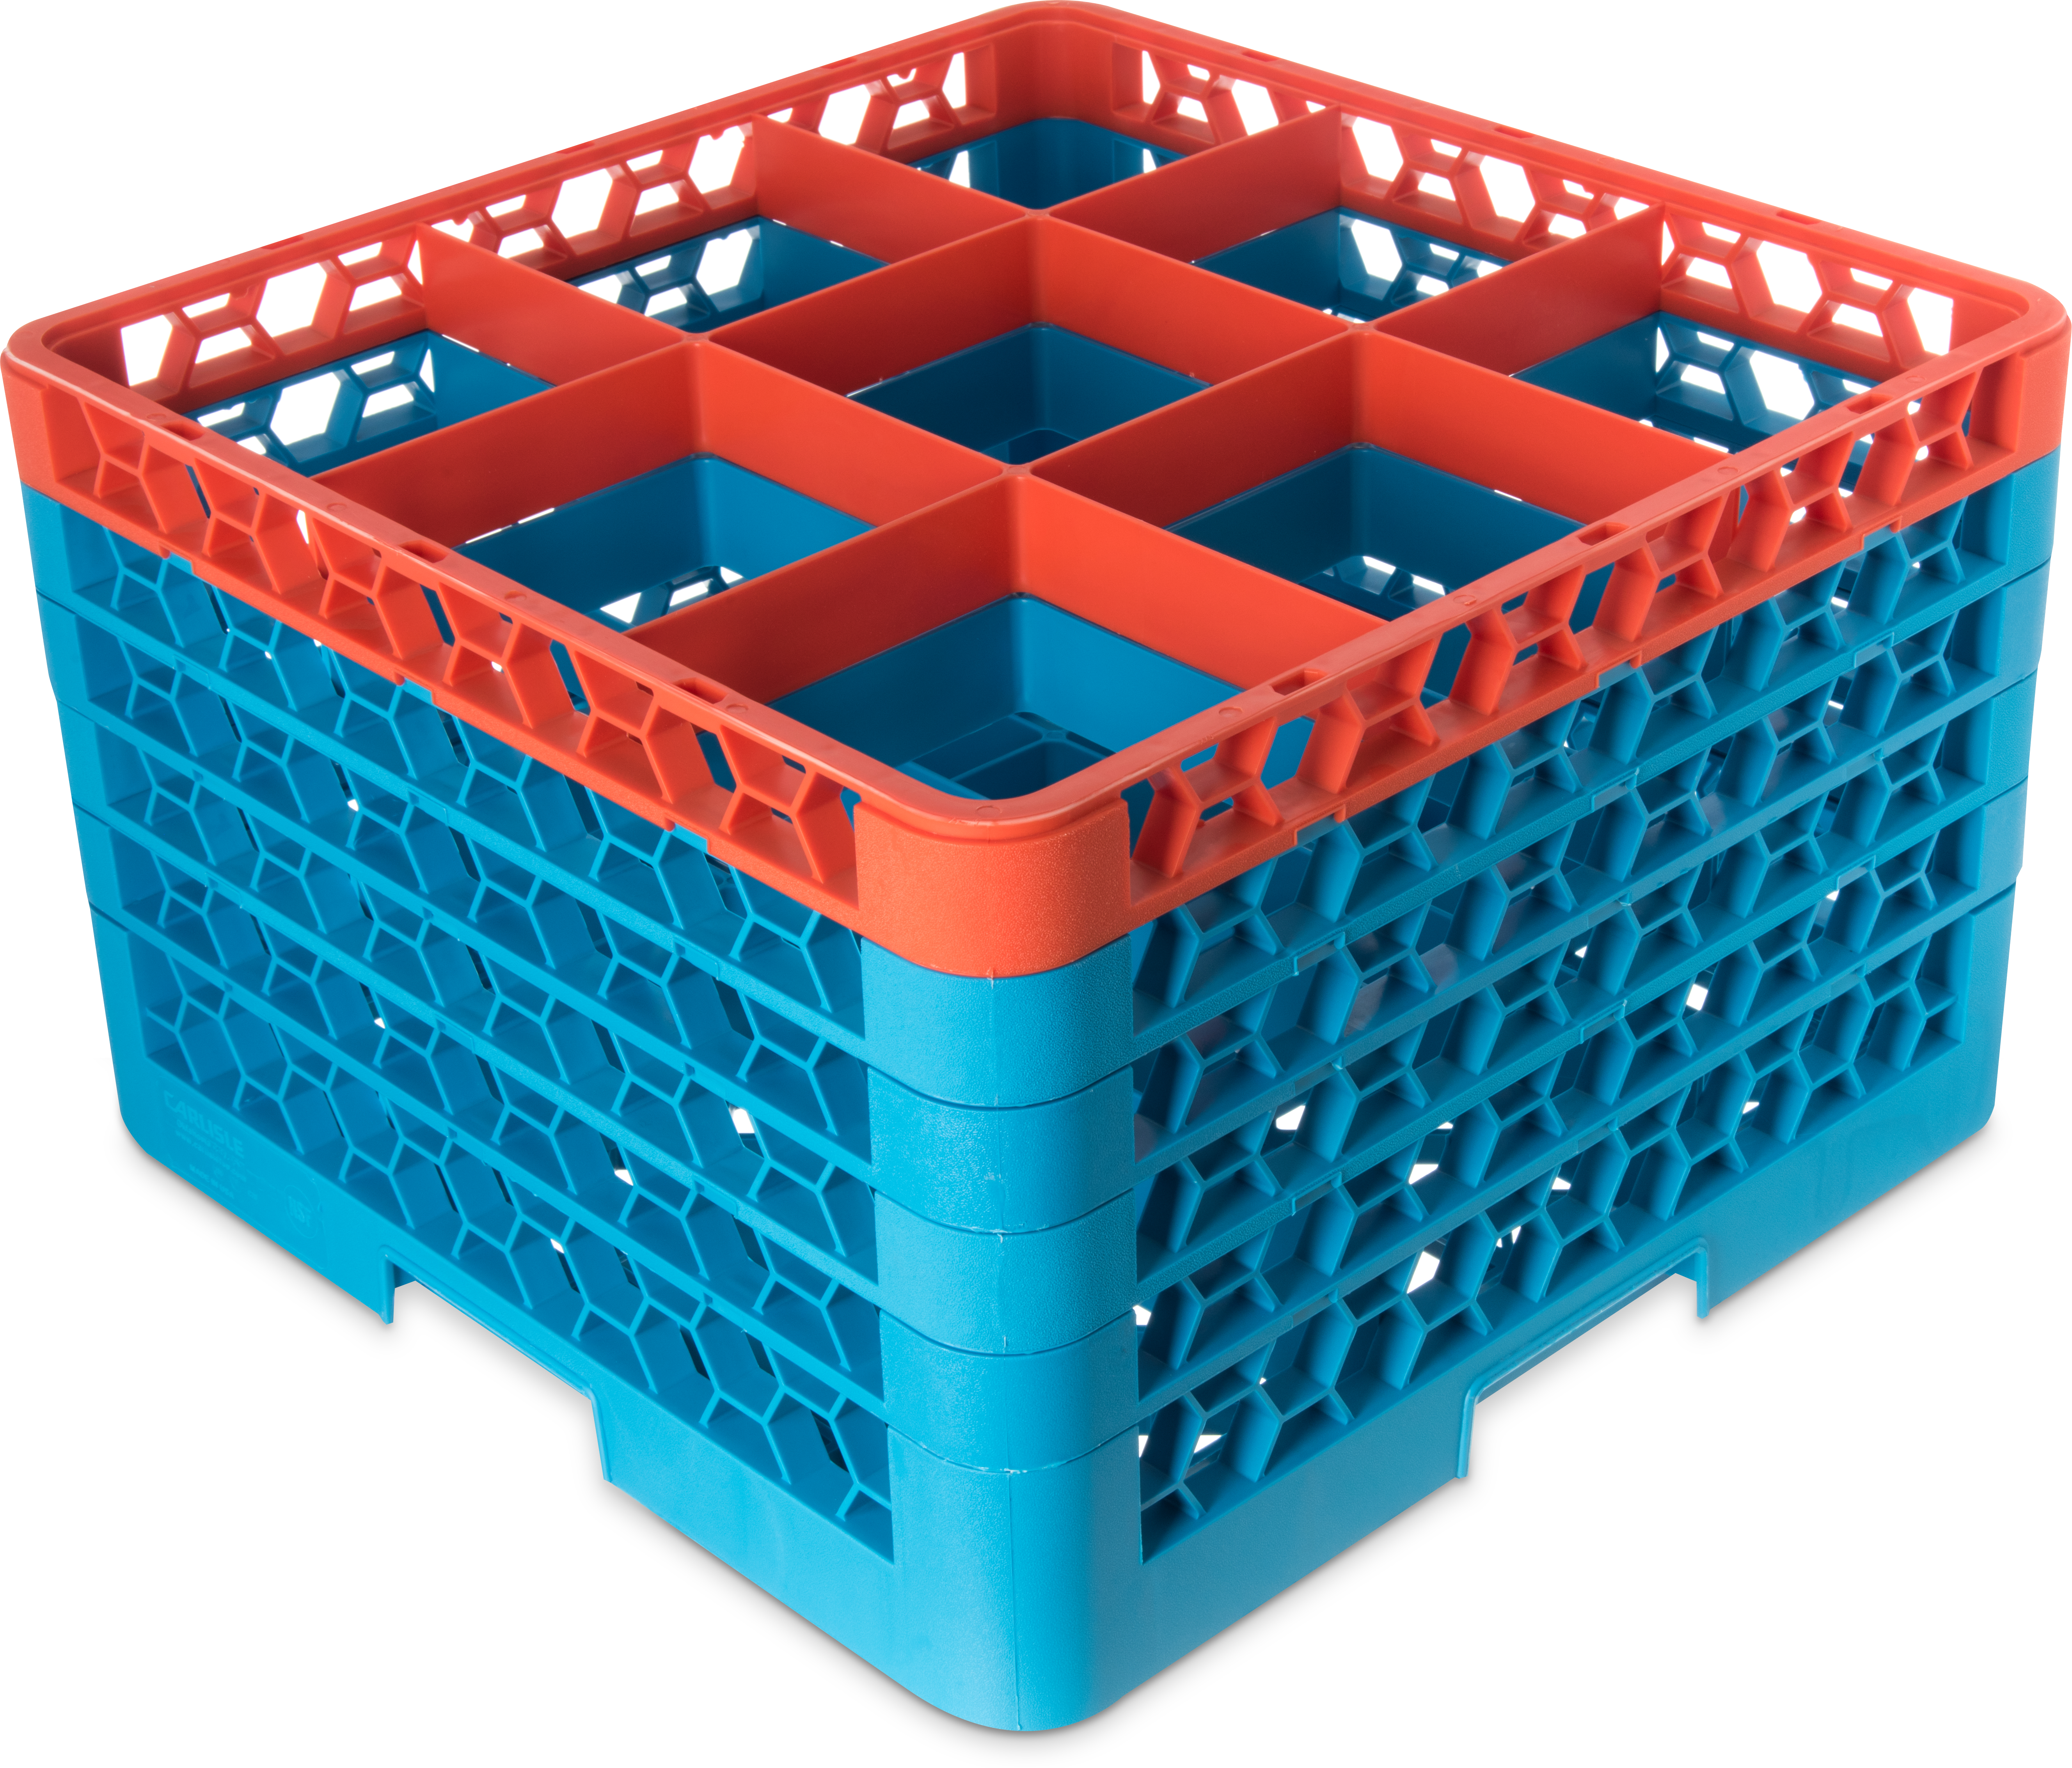 OptiClean 9 Compartment Glass Rack with 5 Extenders 11.9 - Orange-Carlisle Blue